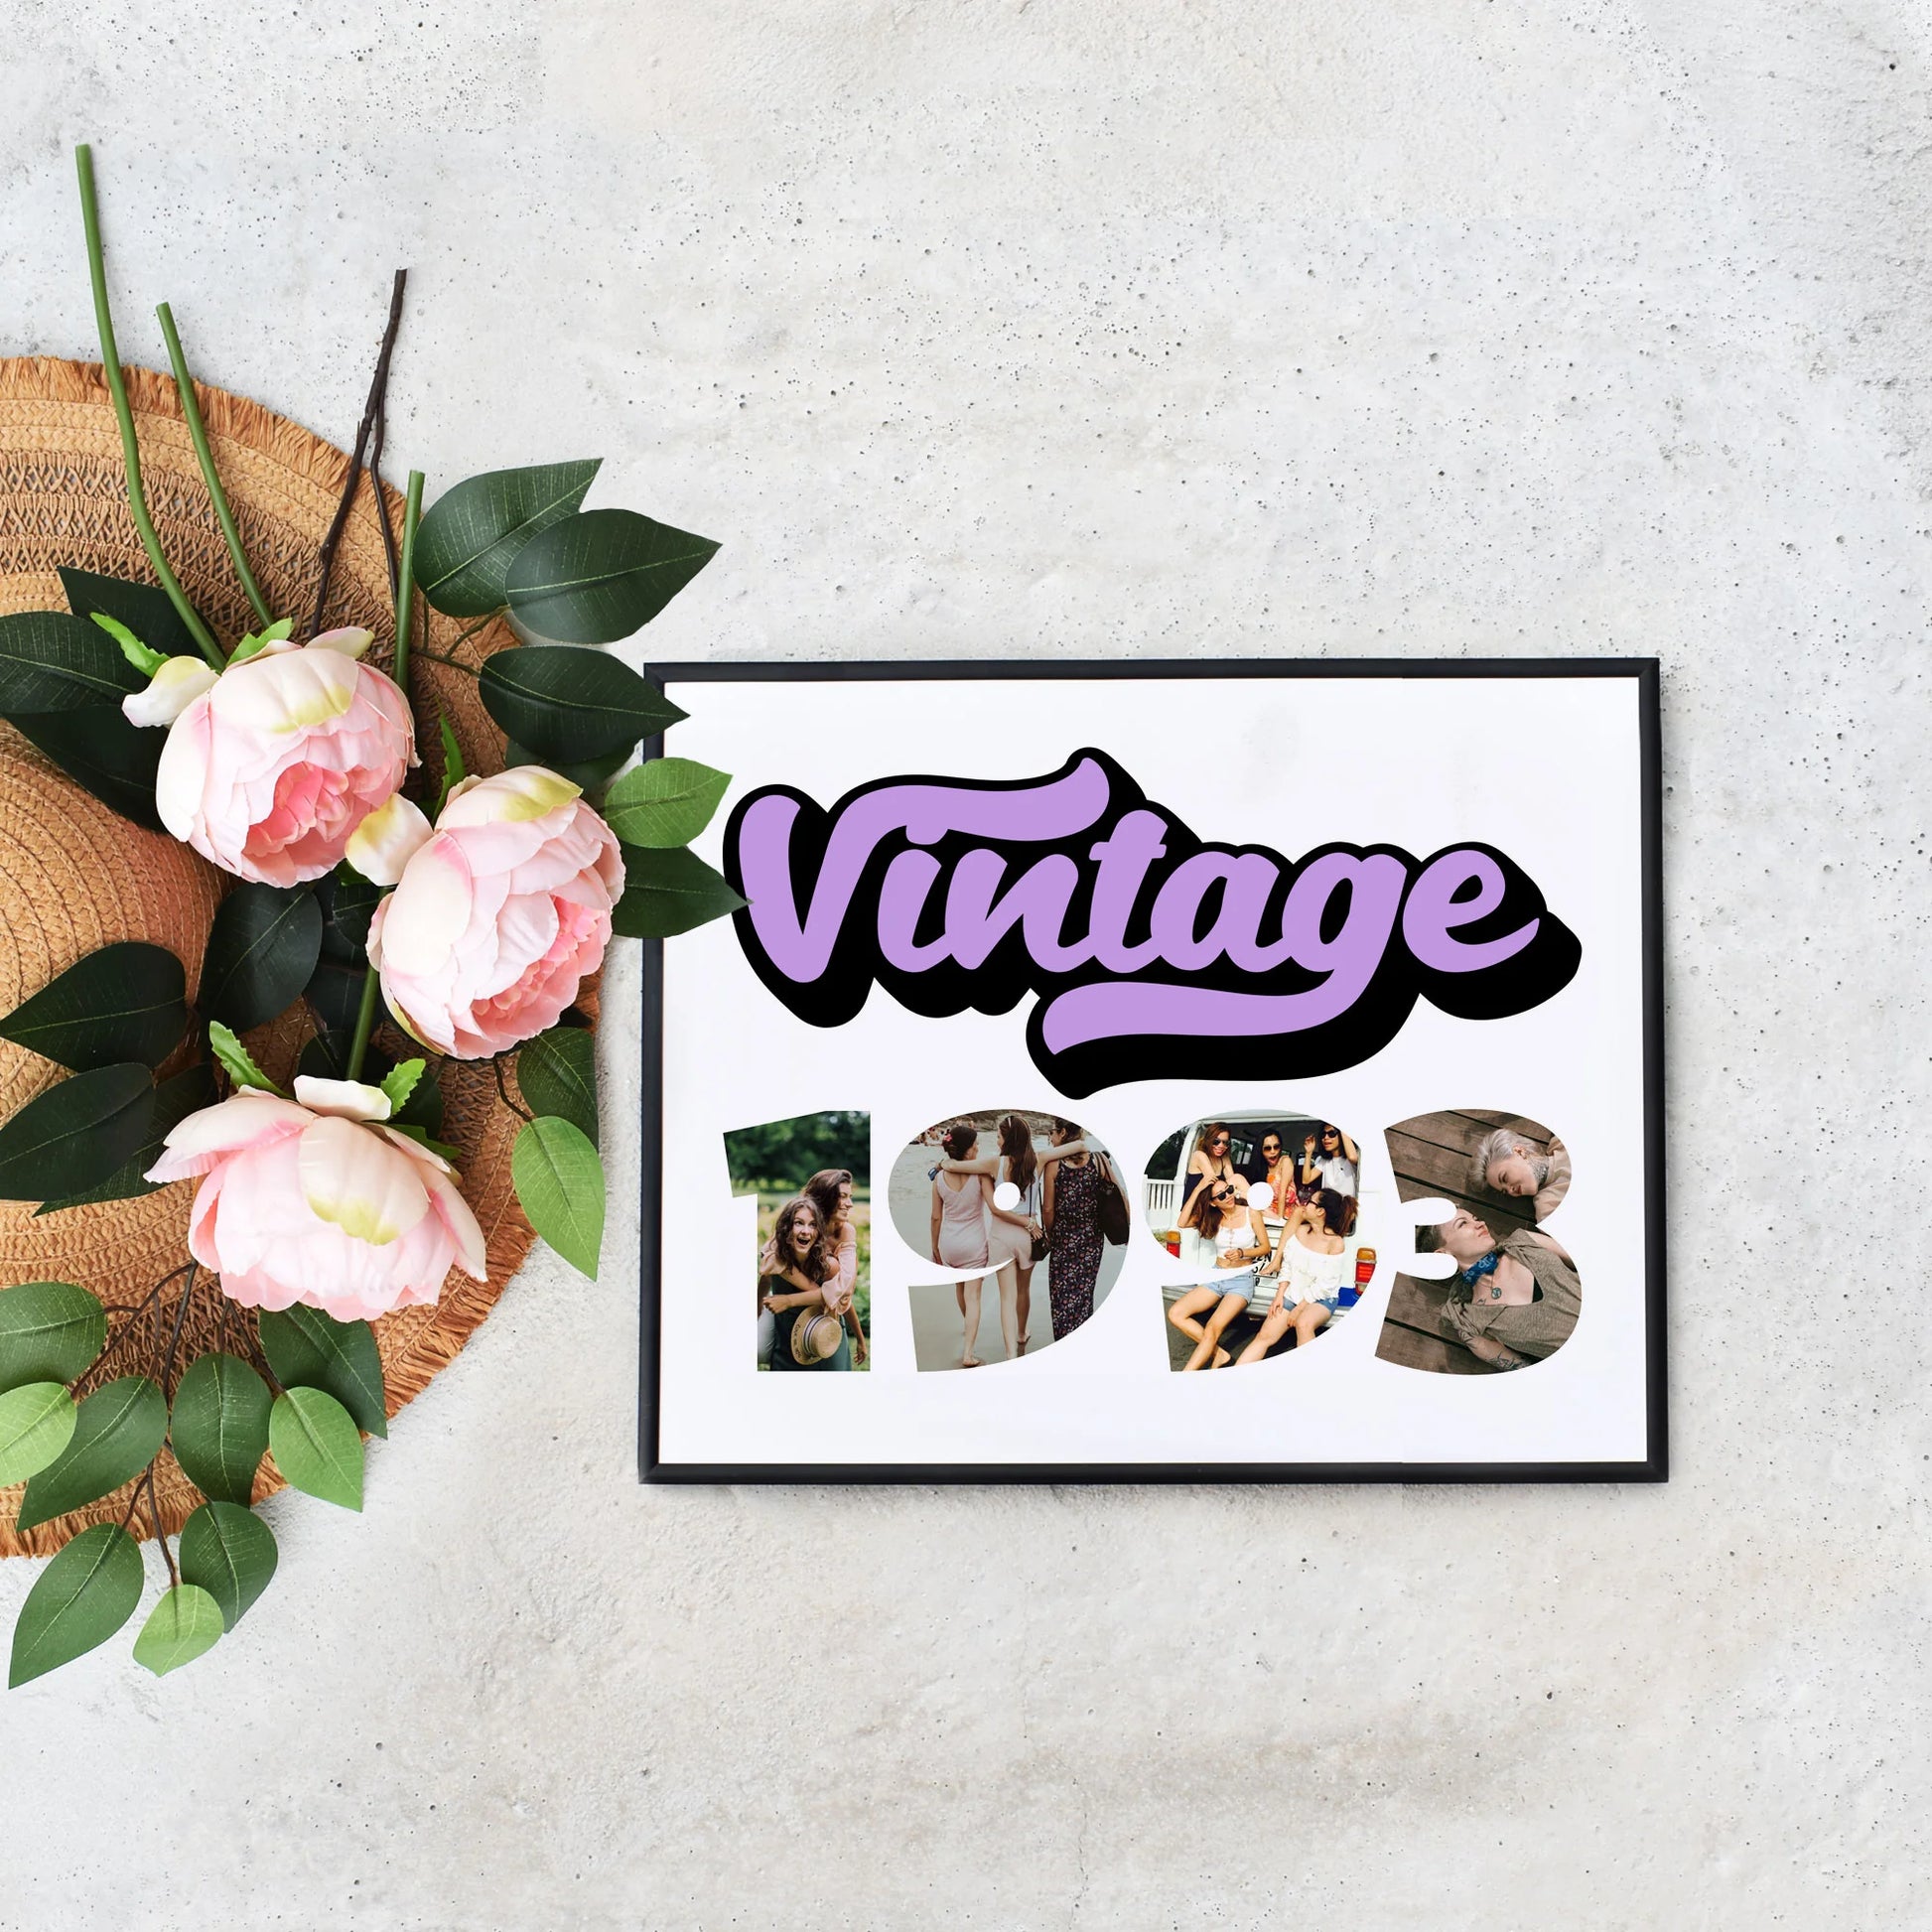 Editable Vintage 1993 Collage Template by Playful Pixie Studio